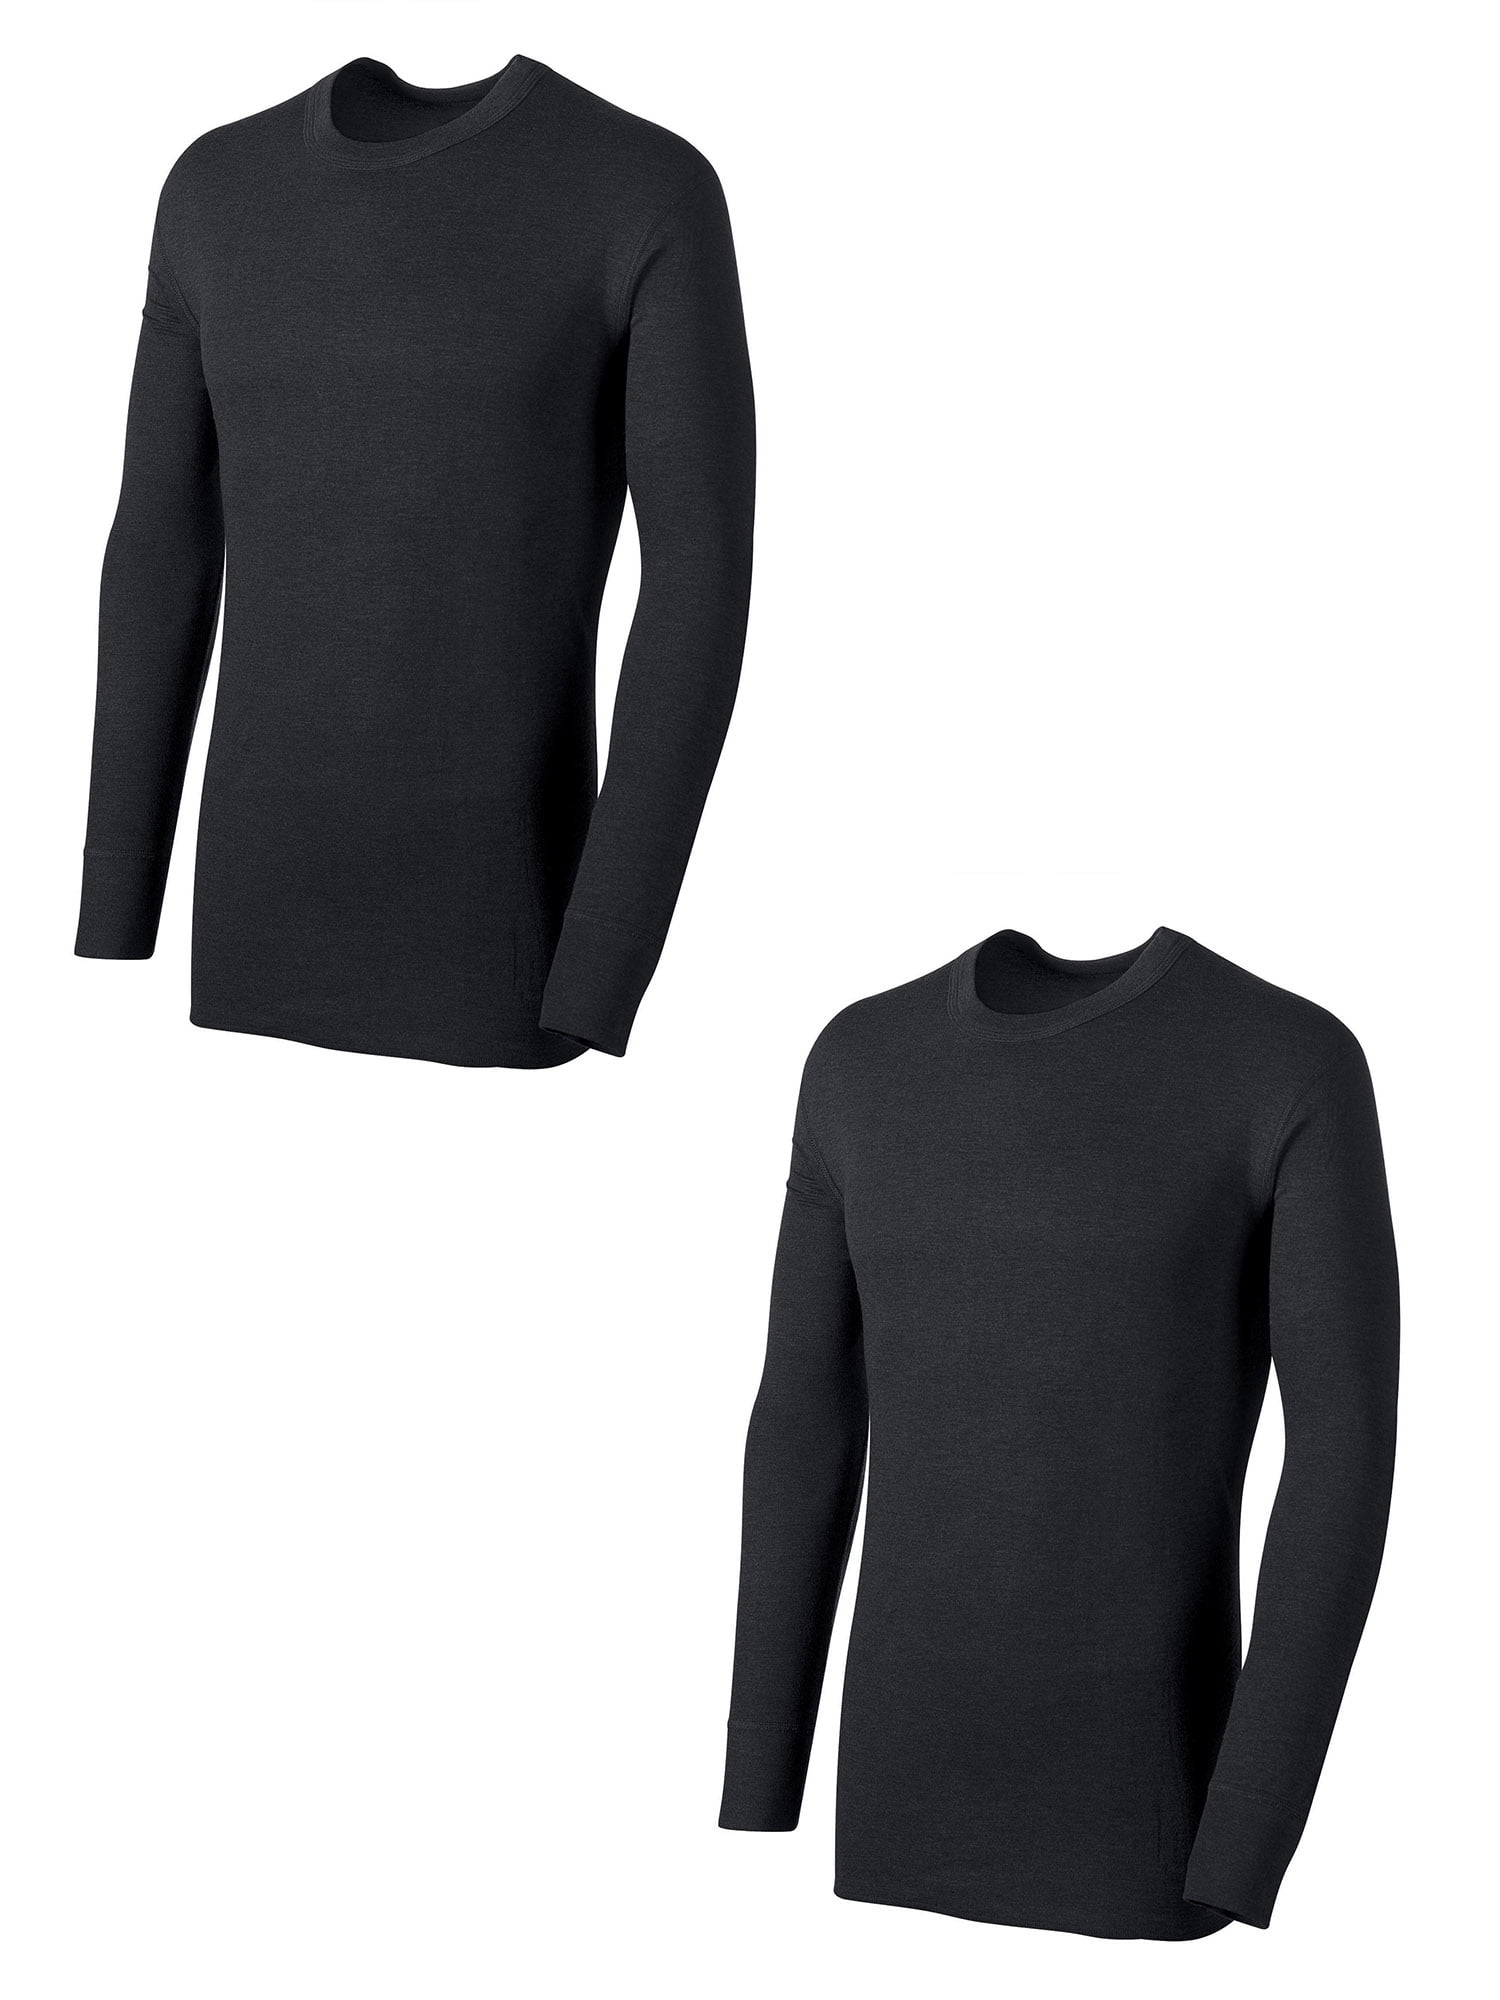 duofold men's mid weight wicking crew neck top